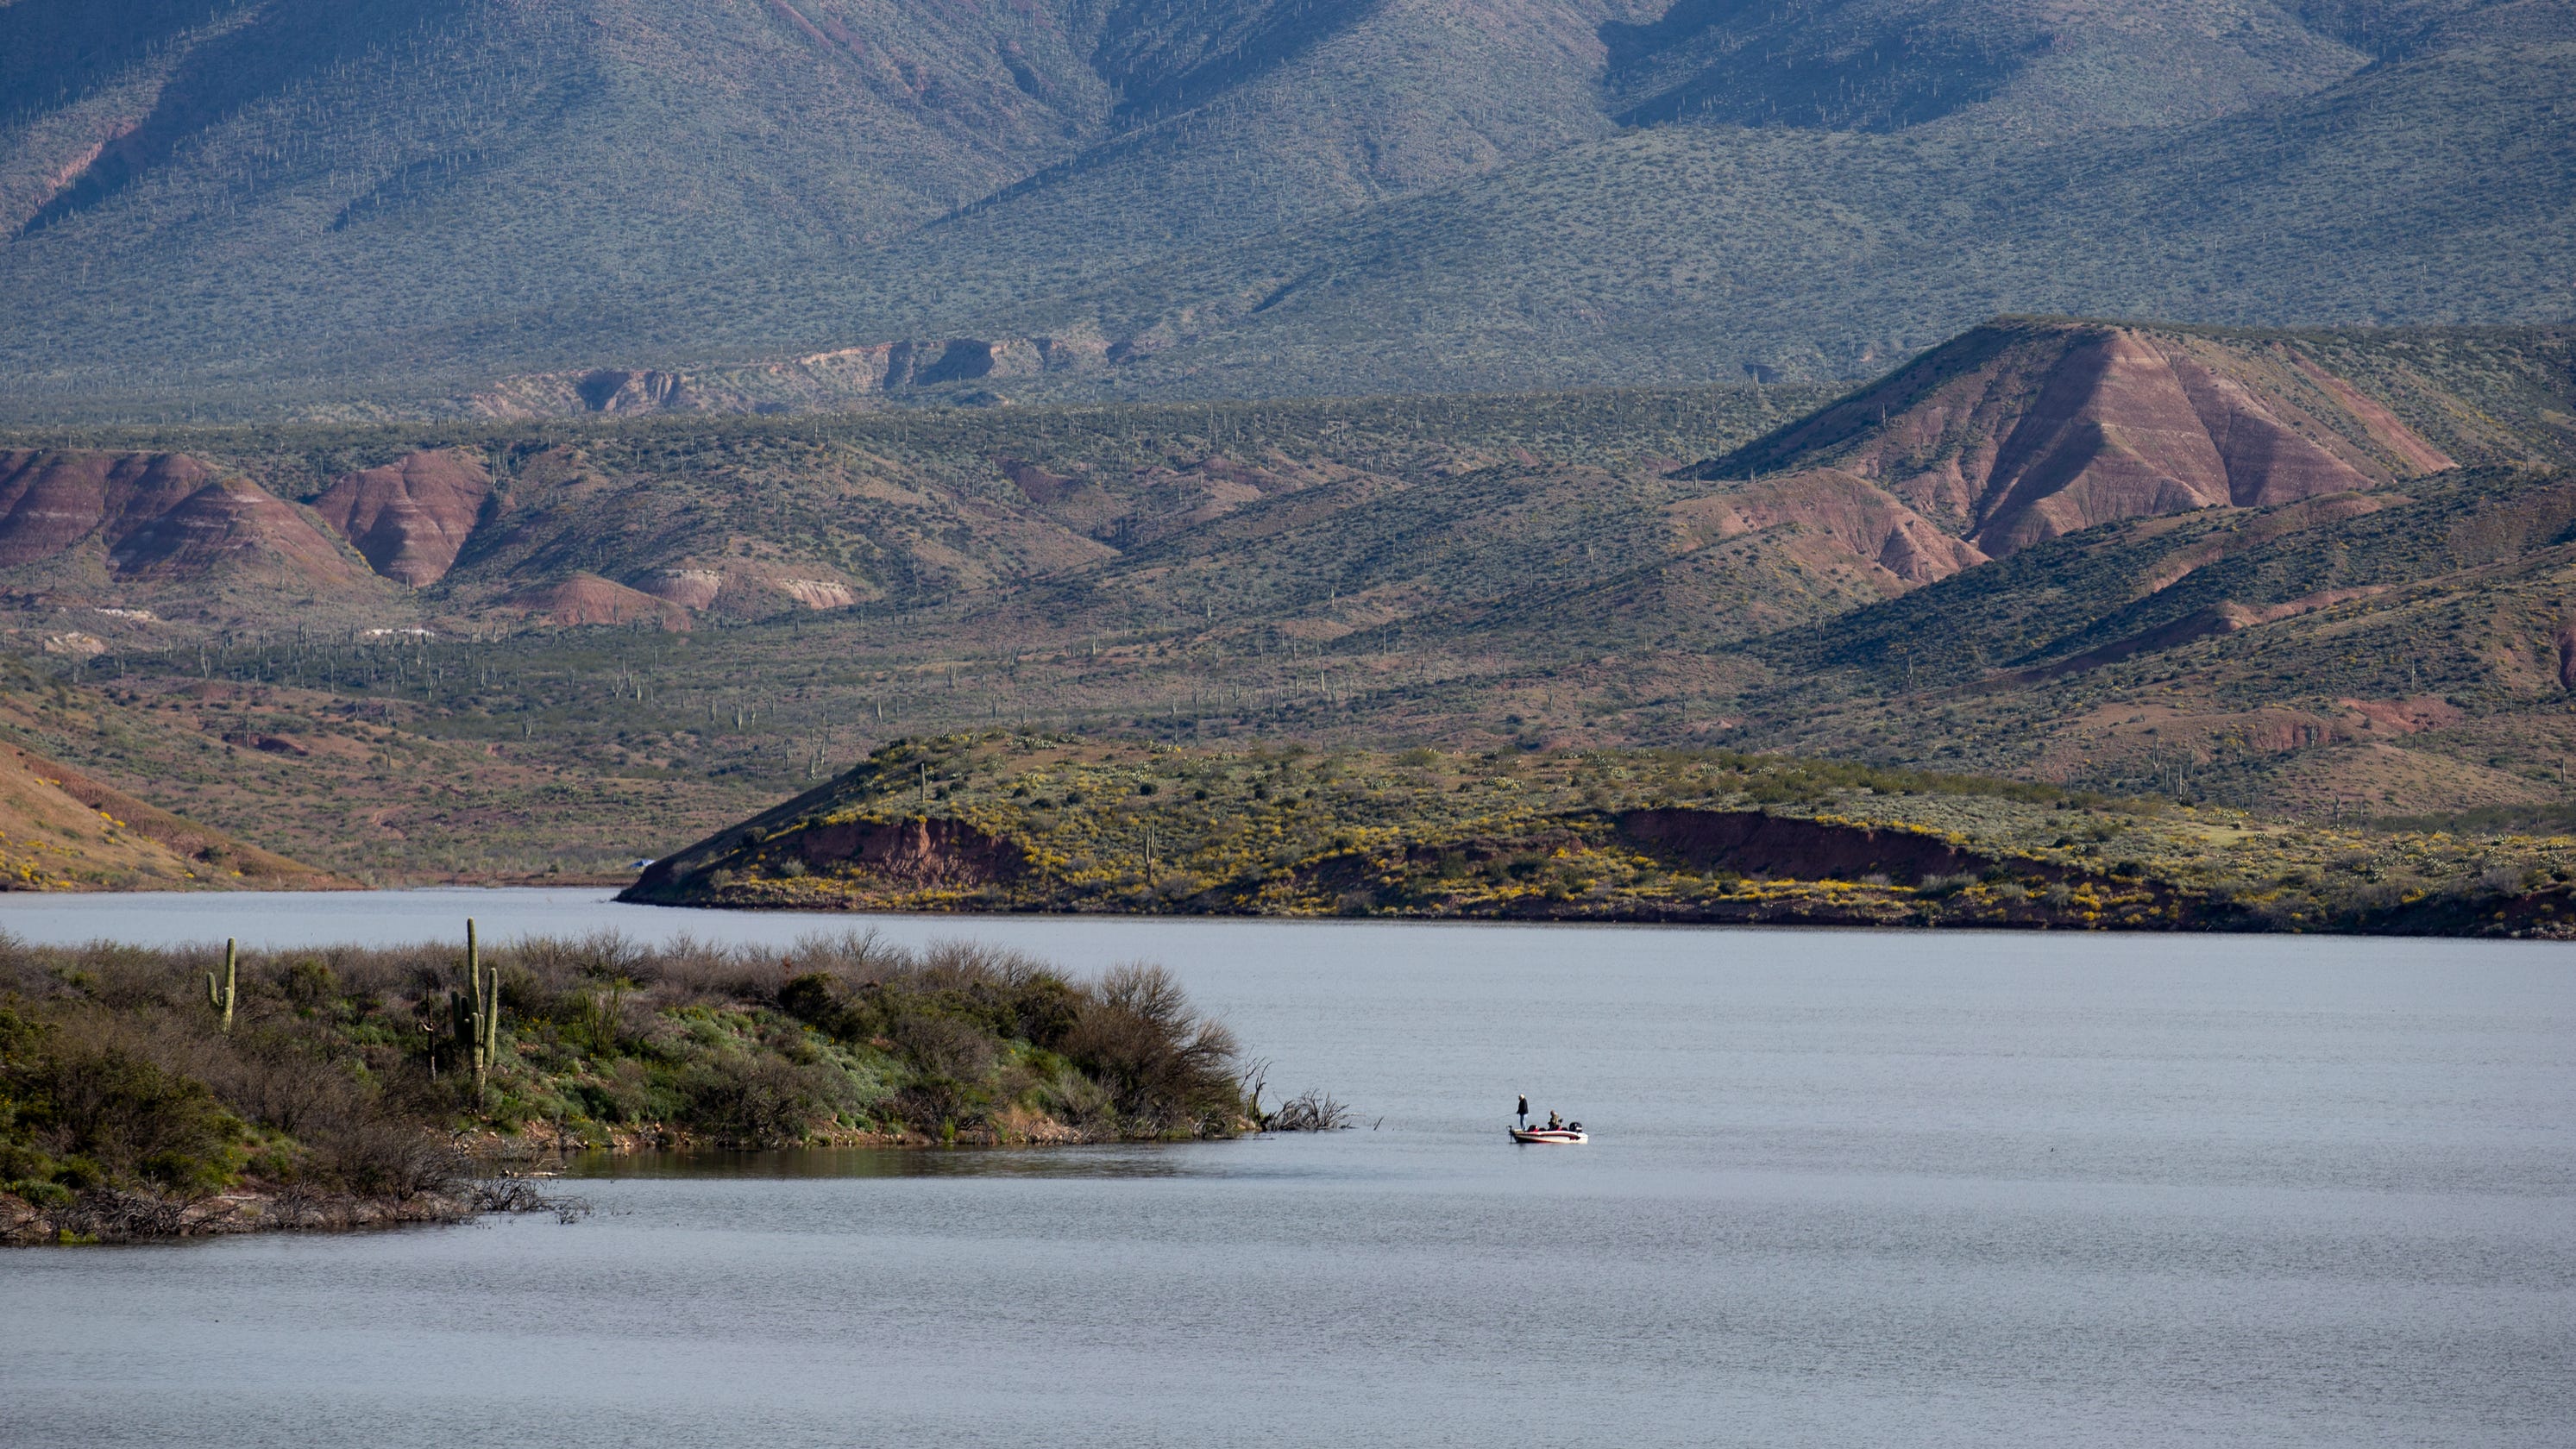 Study says Phoenix reservoirs are resilient to warming, scientists warn risks remain - AZCentral